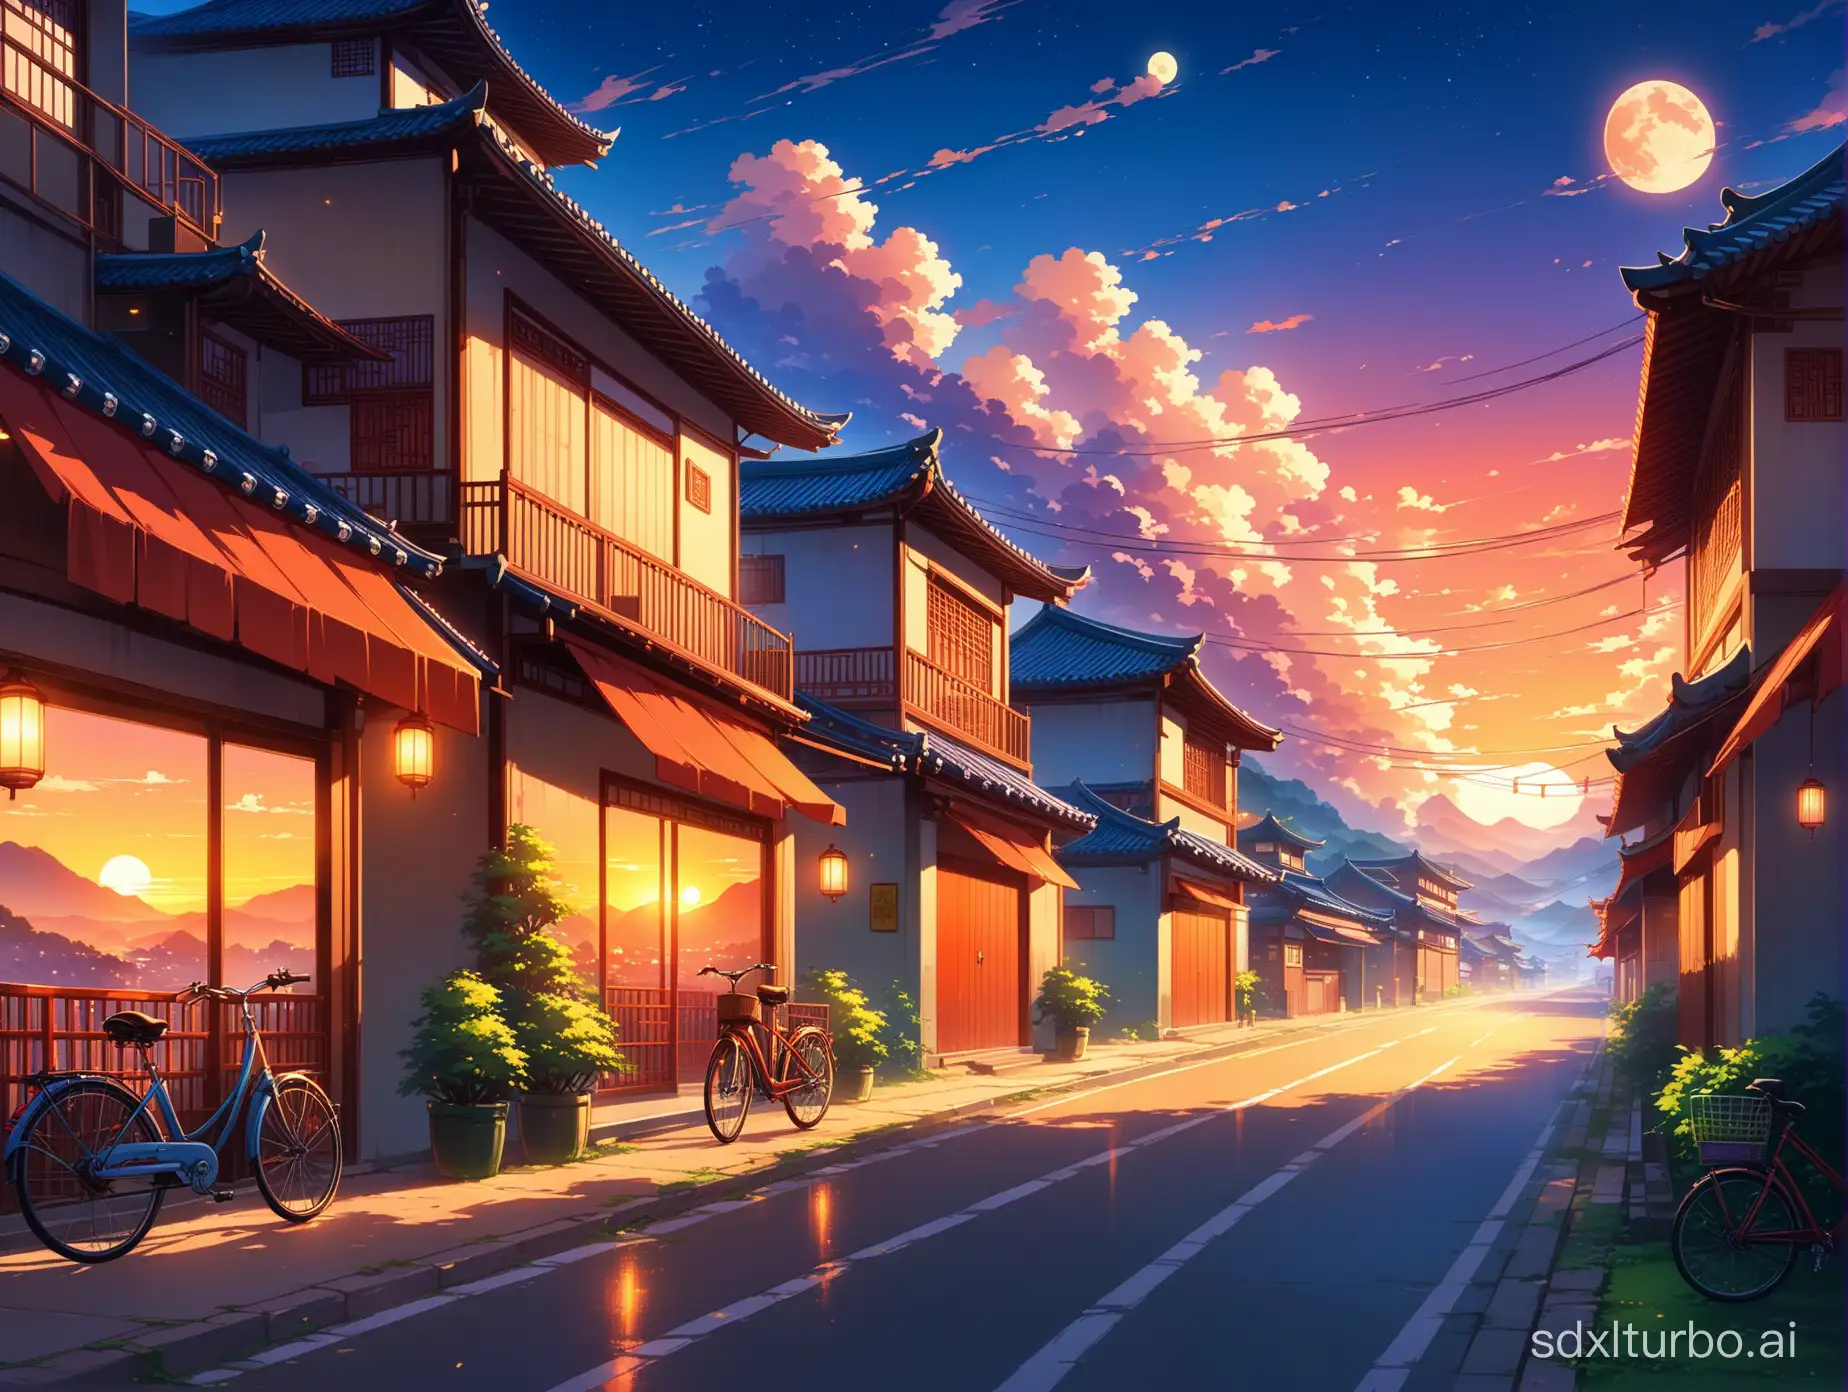 Colorful-Evening-Sunset-on-Southern-Chinese-Town-Street-with-Bicycle-and-Moon